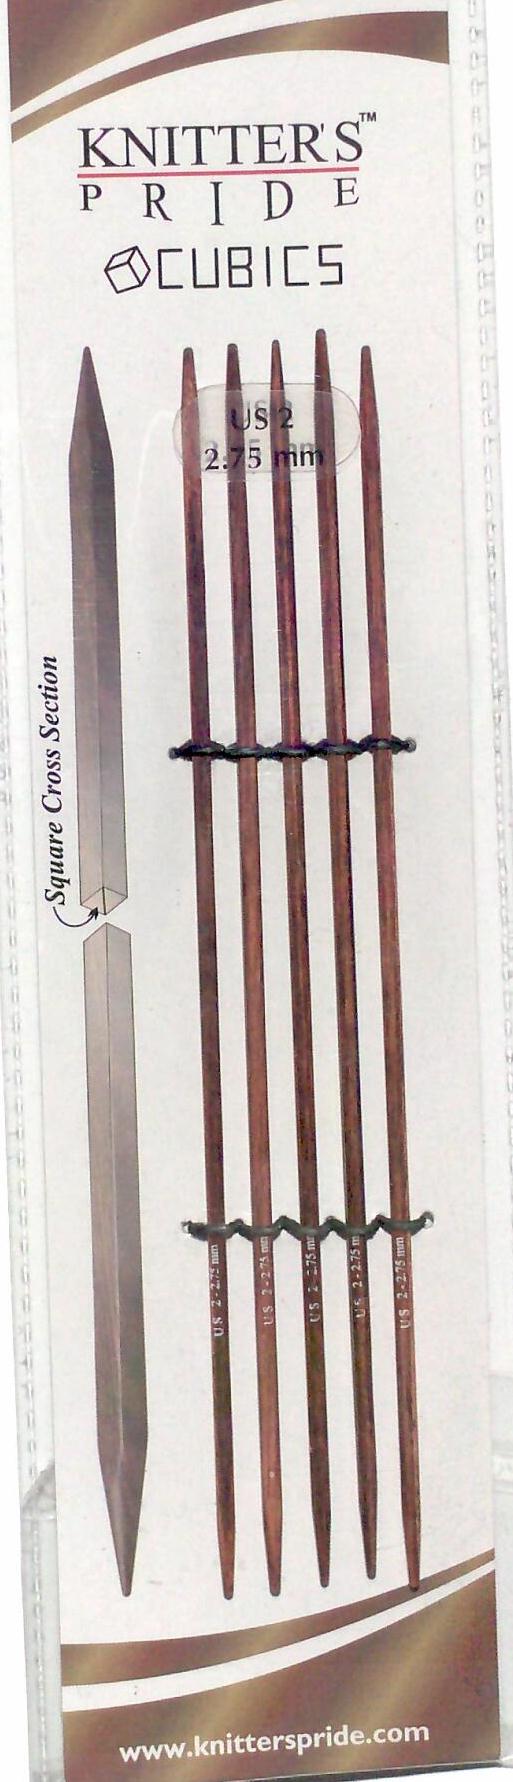 Knitter's Pride 06"/15 cm 2.00 mm/US 0 Rosewood Cubics Double Point Needles 